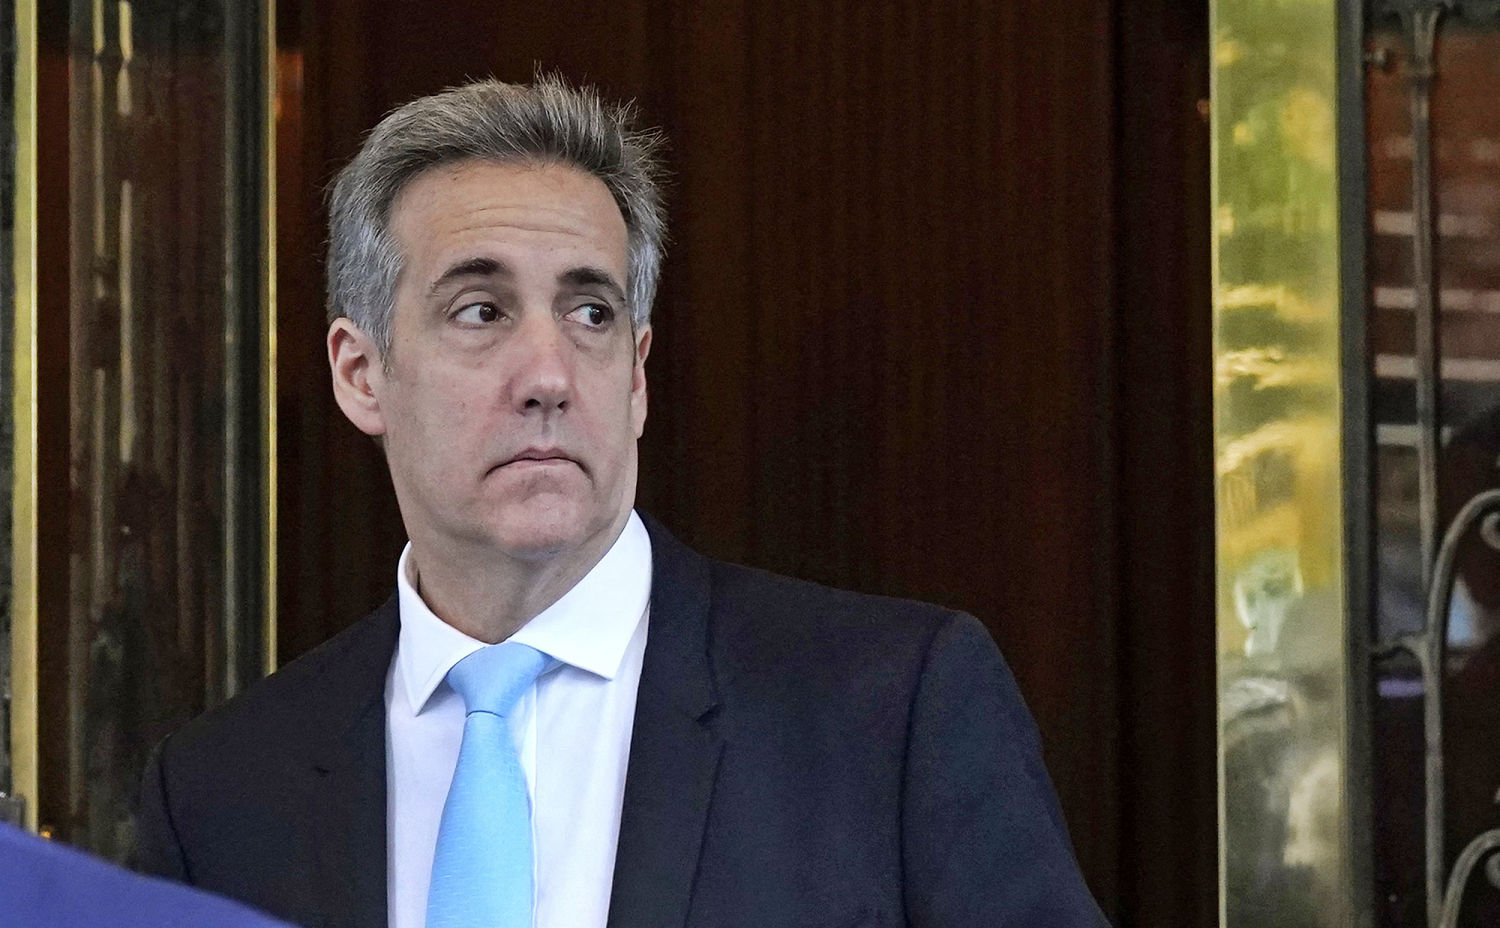 Michael Cohen expected to detail how Trump reimbursed him for hush money payment